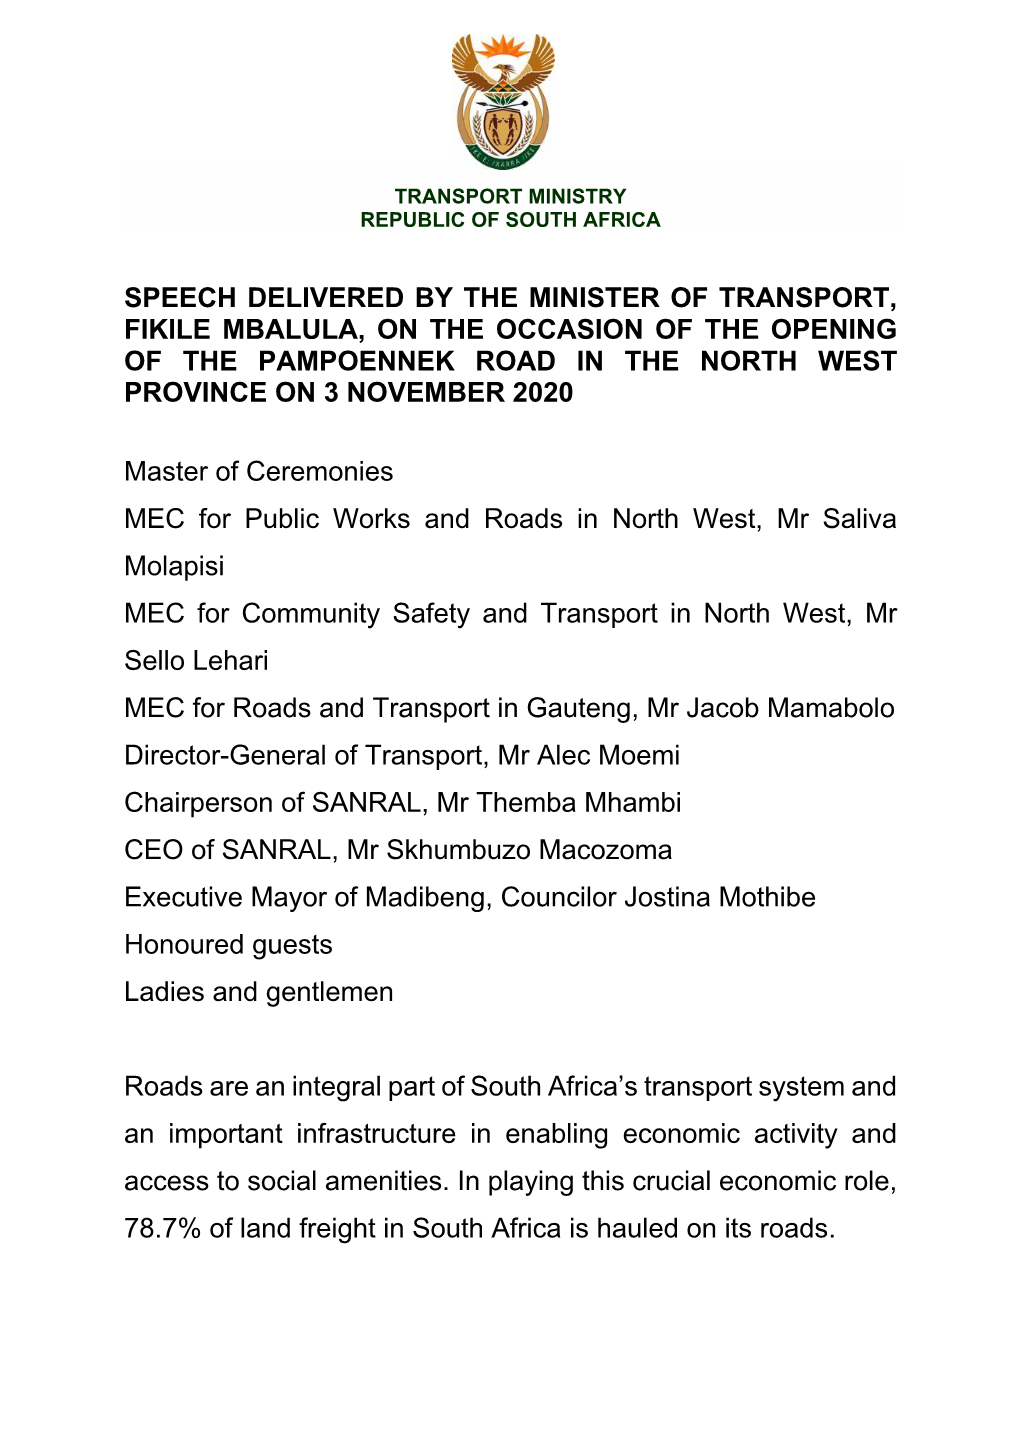 Speech Delivered by the Minister of Transport, Fikile Mbalula, on the Occasion of the Opening of the Pampoennek Road in the North West Province on 3 November 2020